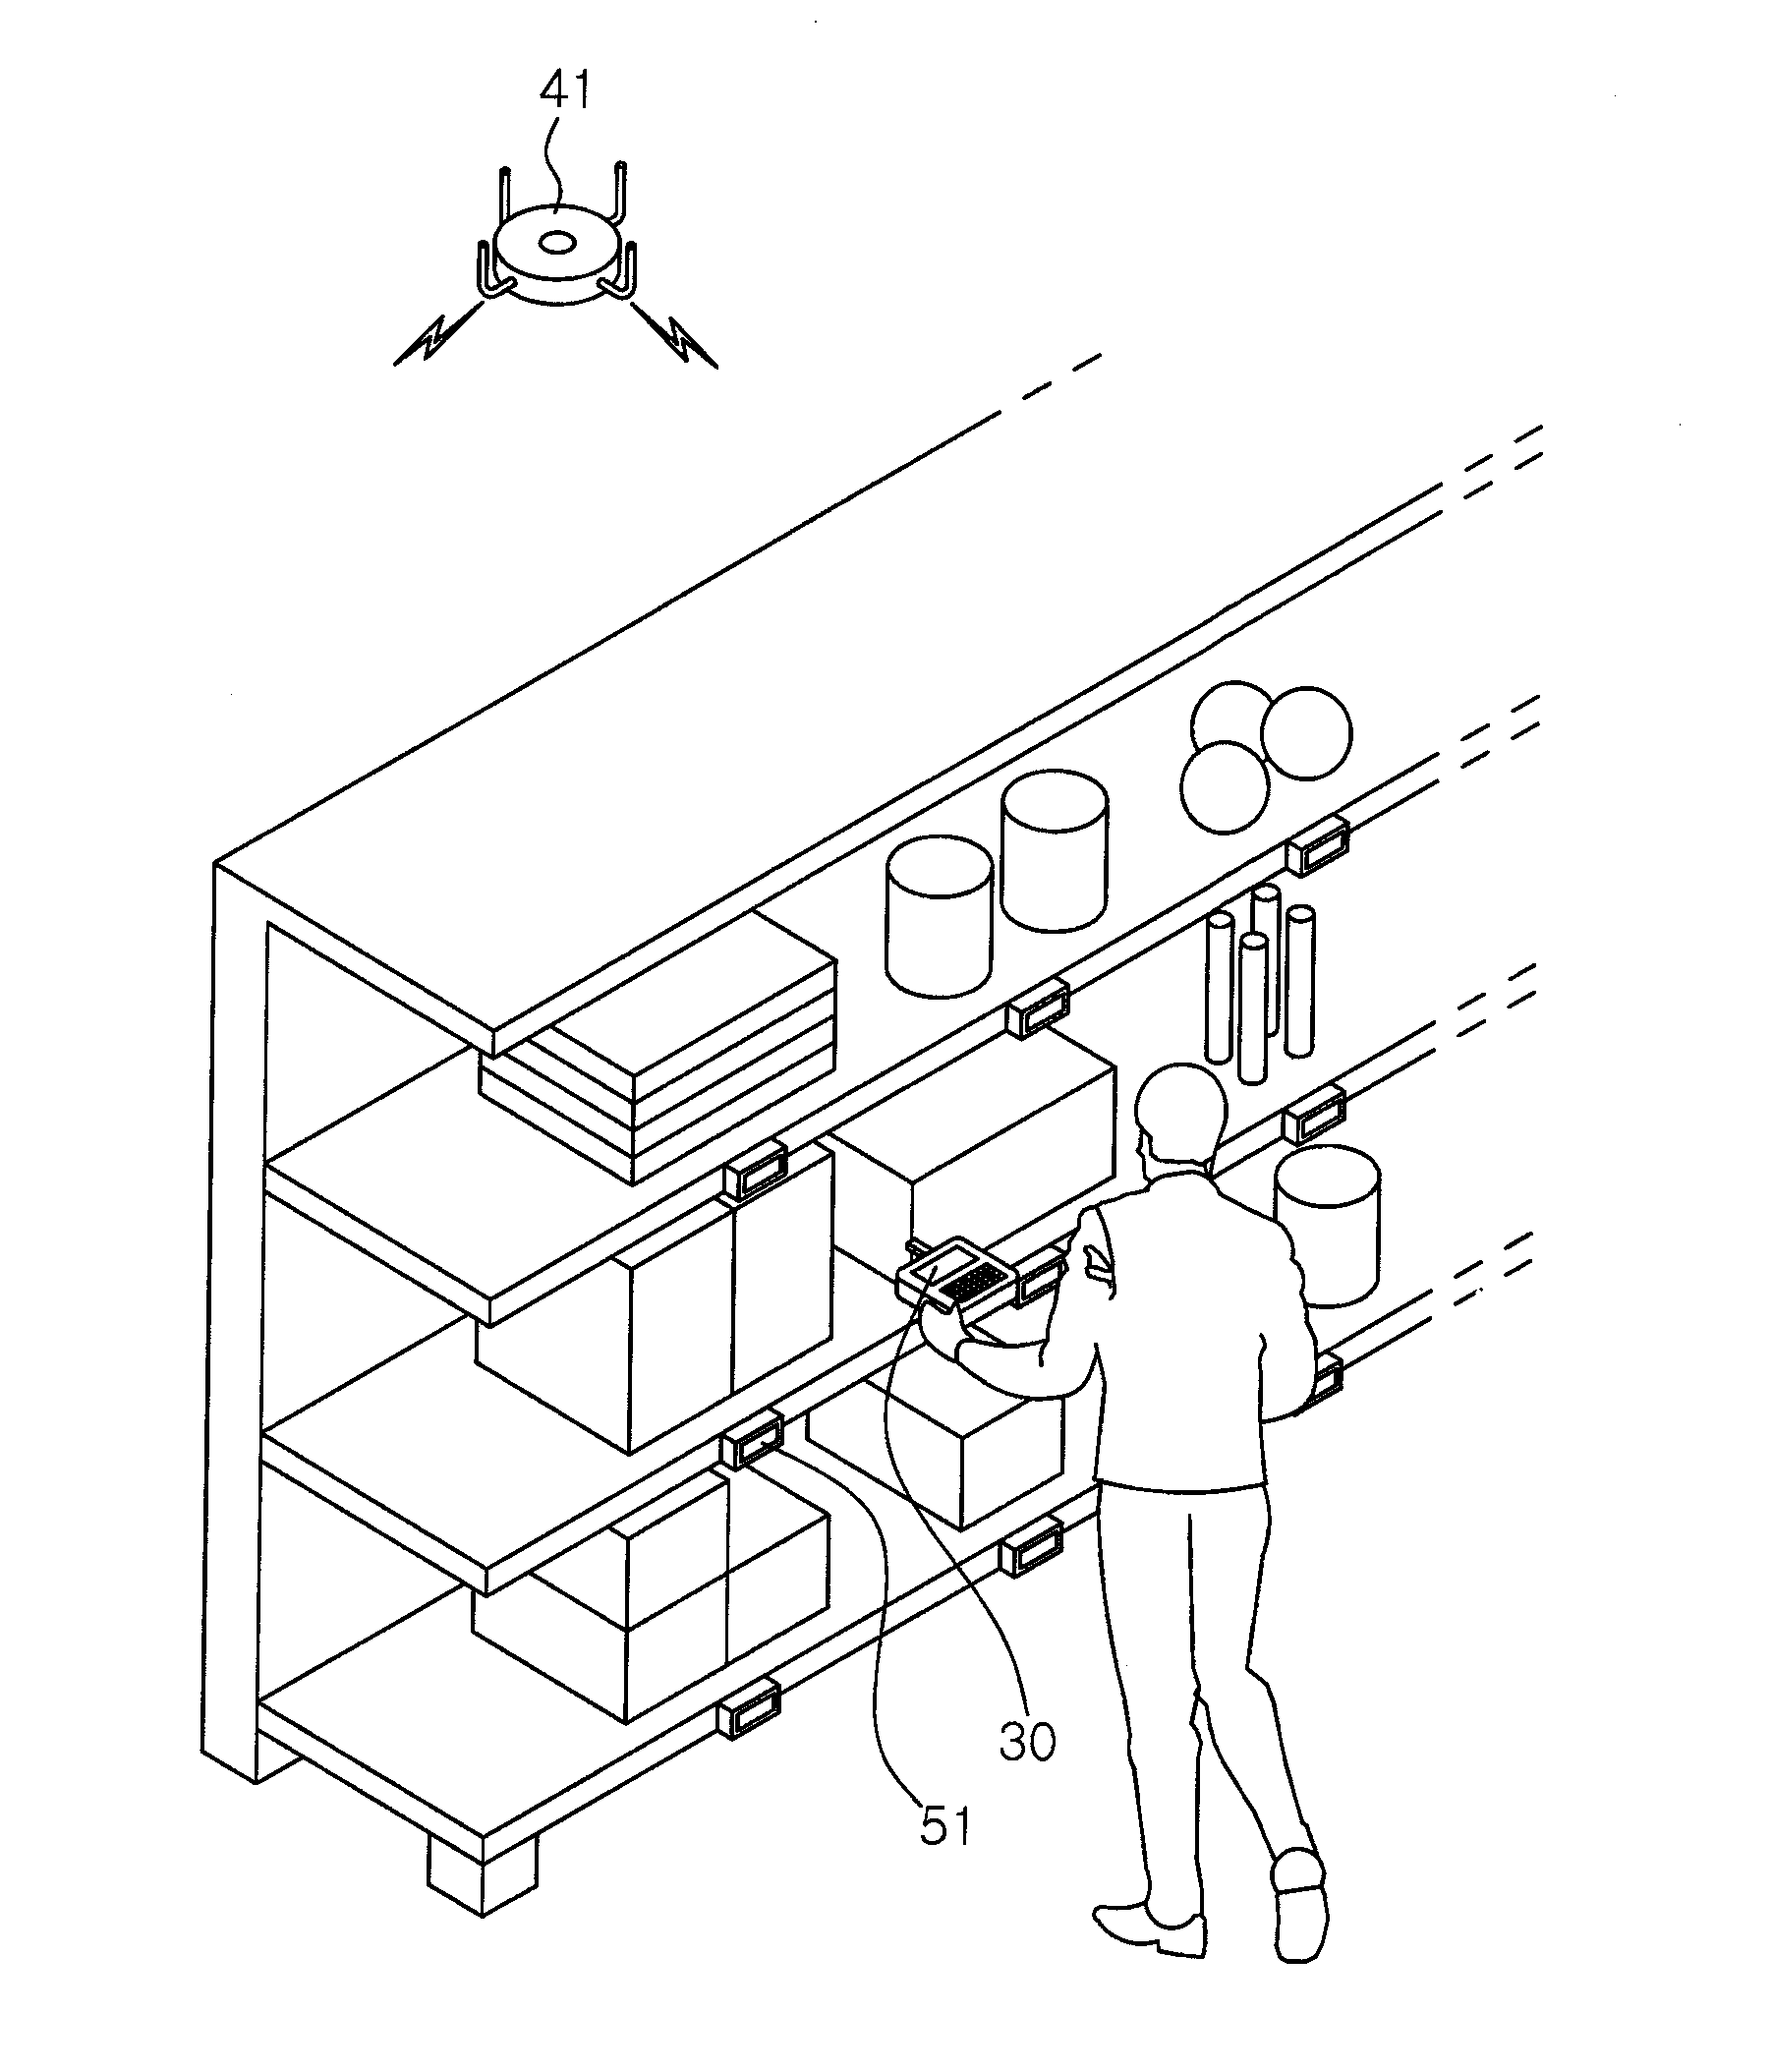 Electronic shelf label system, method of synchronizing electronic shelf label tag with product, and method of updating product information of the same